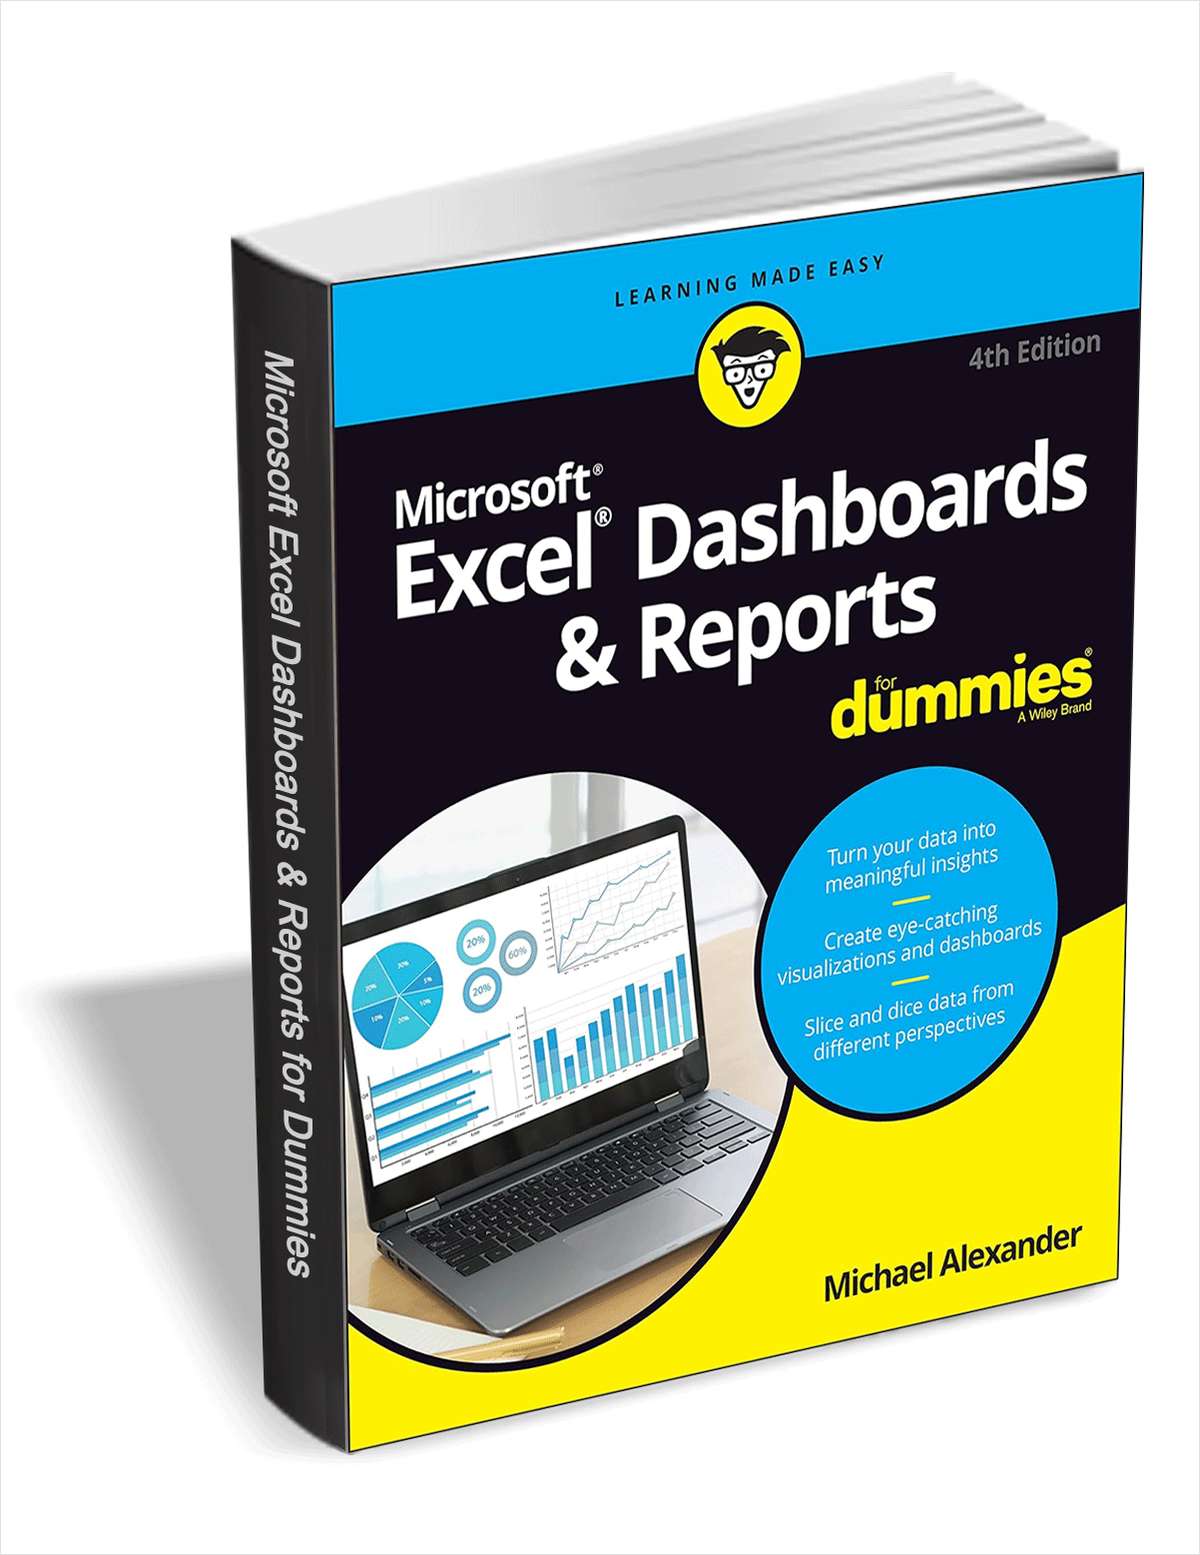 Excel Dashboards & Reports For Dummies, 4th Edition ($24.00 Value) FREE for a Limited Time